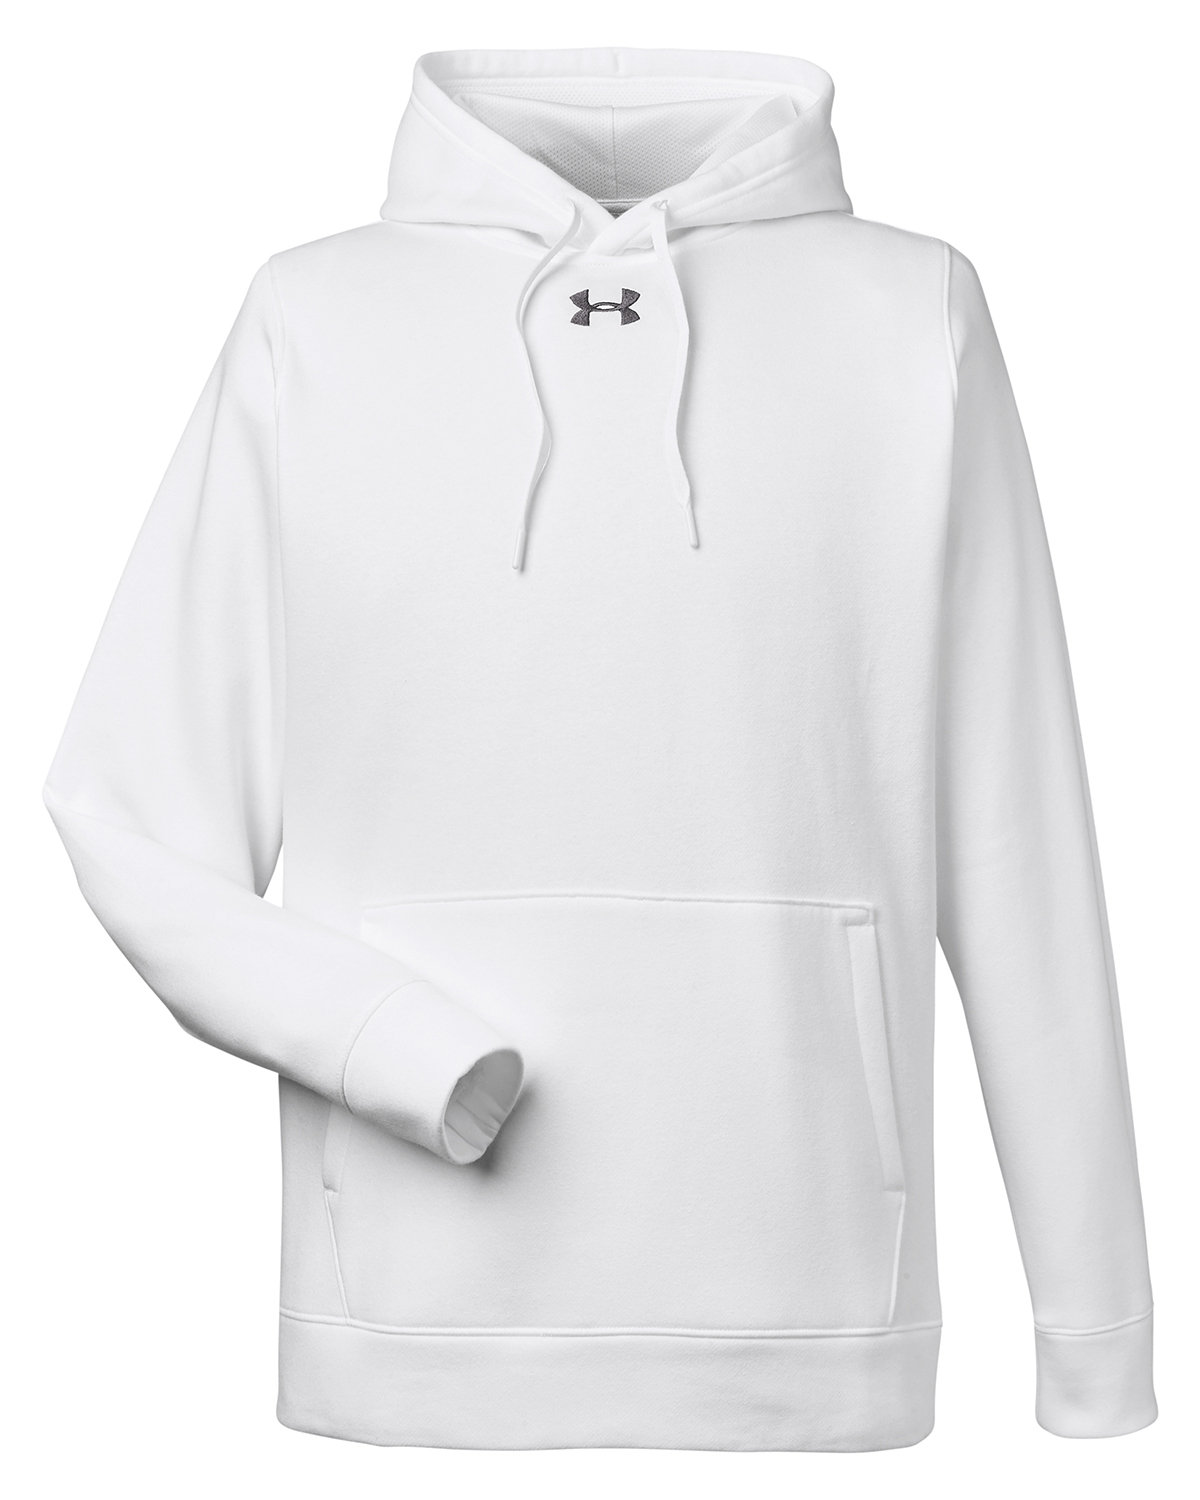 Picture of Under Armour Men's Hustle Pullover Hooded Sweatshirt